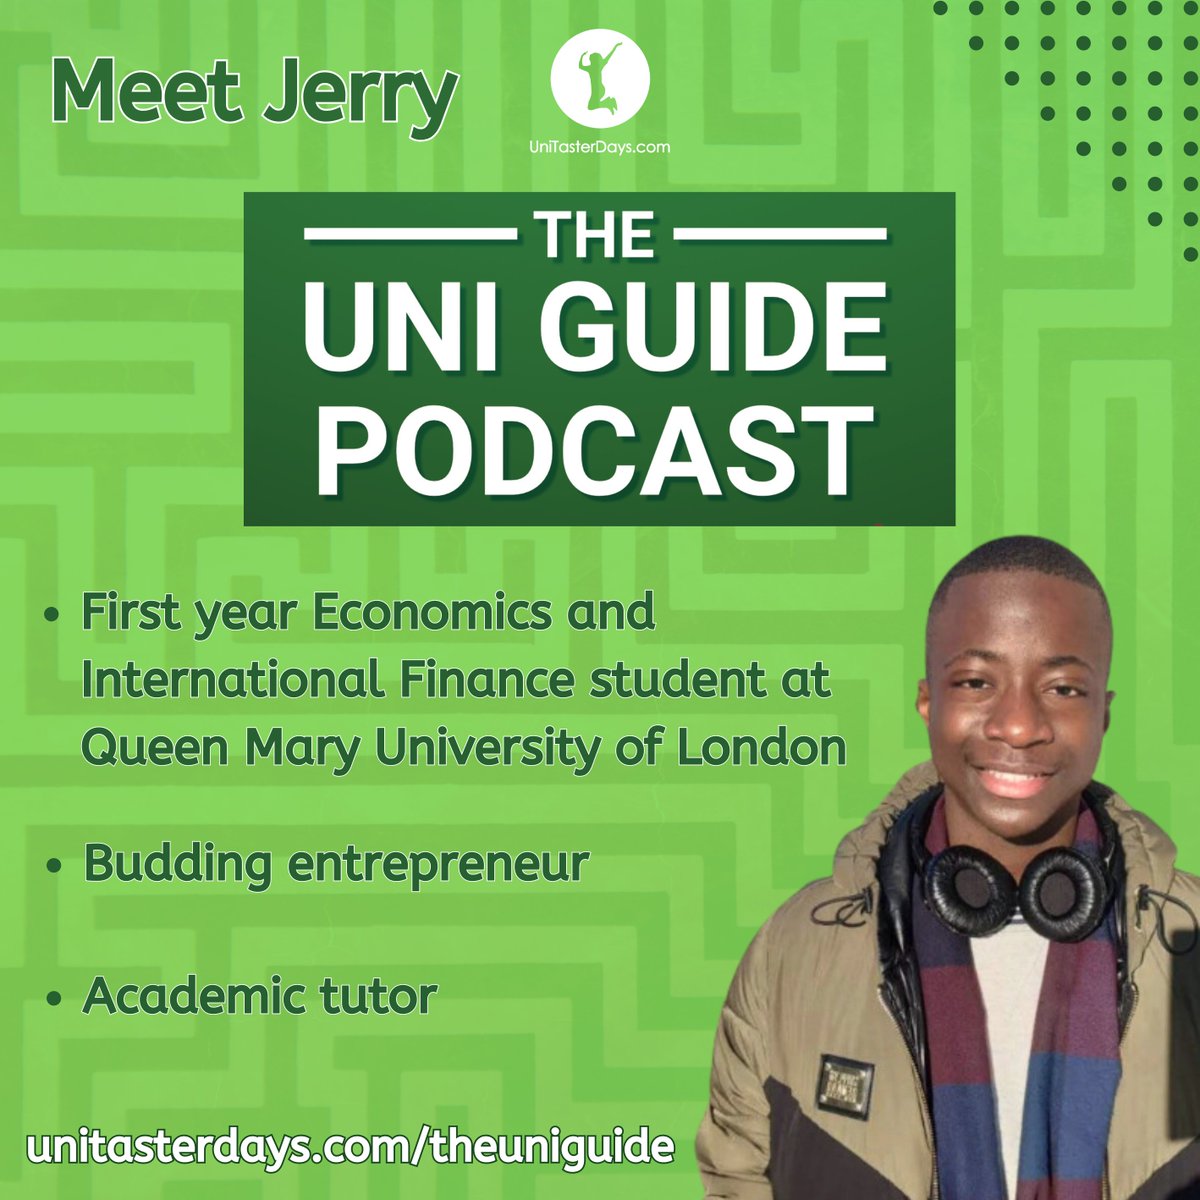 Introducing Jerry..

Another brilliant new voice on the Uni Guide Podcast student panel. Jerry is a first year Economics and Finance student at @QMUL @QMULOutreach an academic tutor and an entrepreneur. Listen on all streaming platforms, or direct: unitasterdays.com/listen-to-the-… #UTDIAG